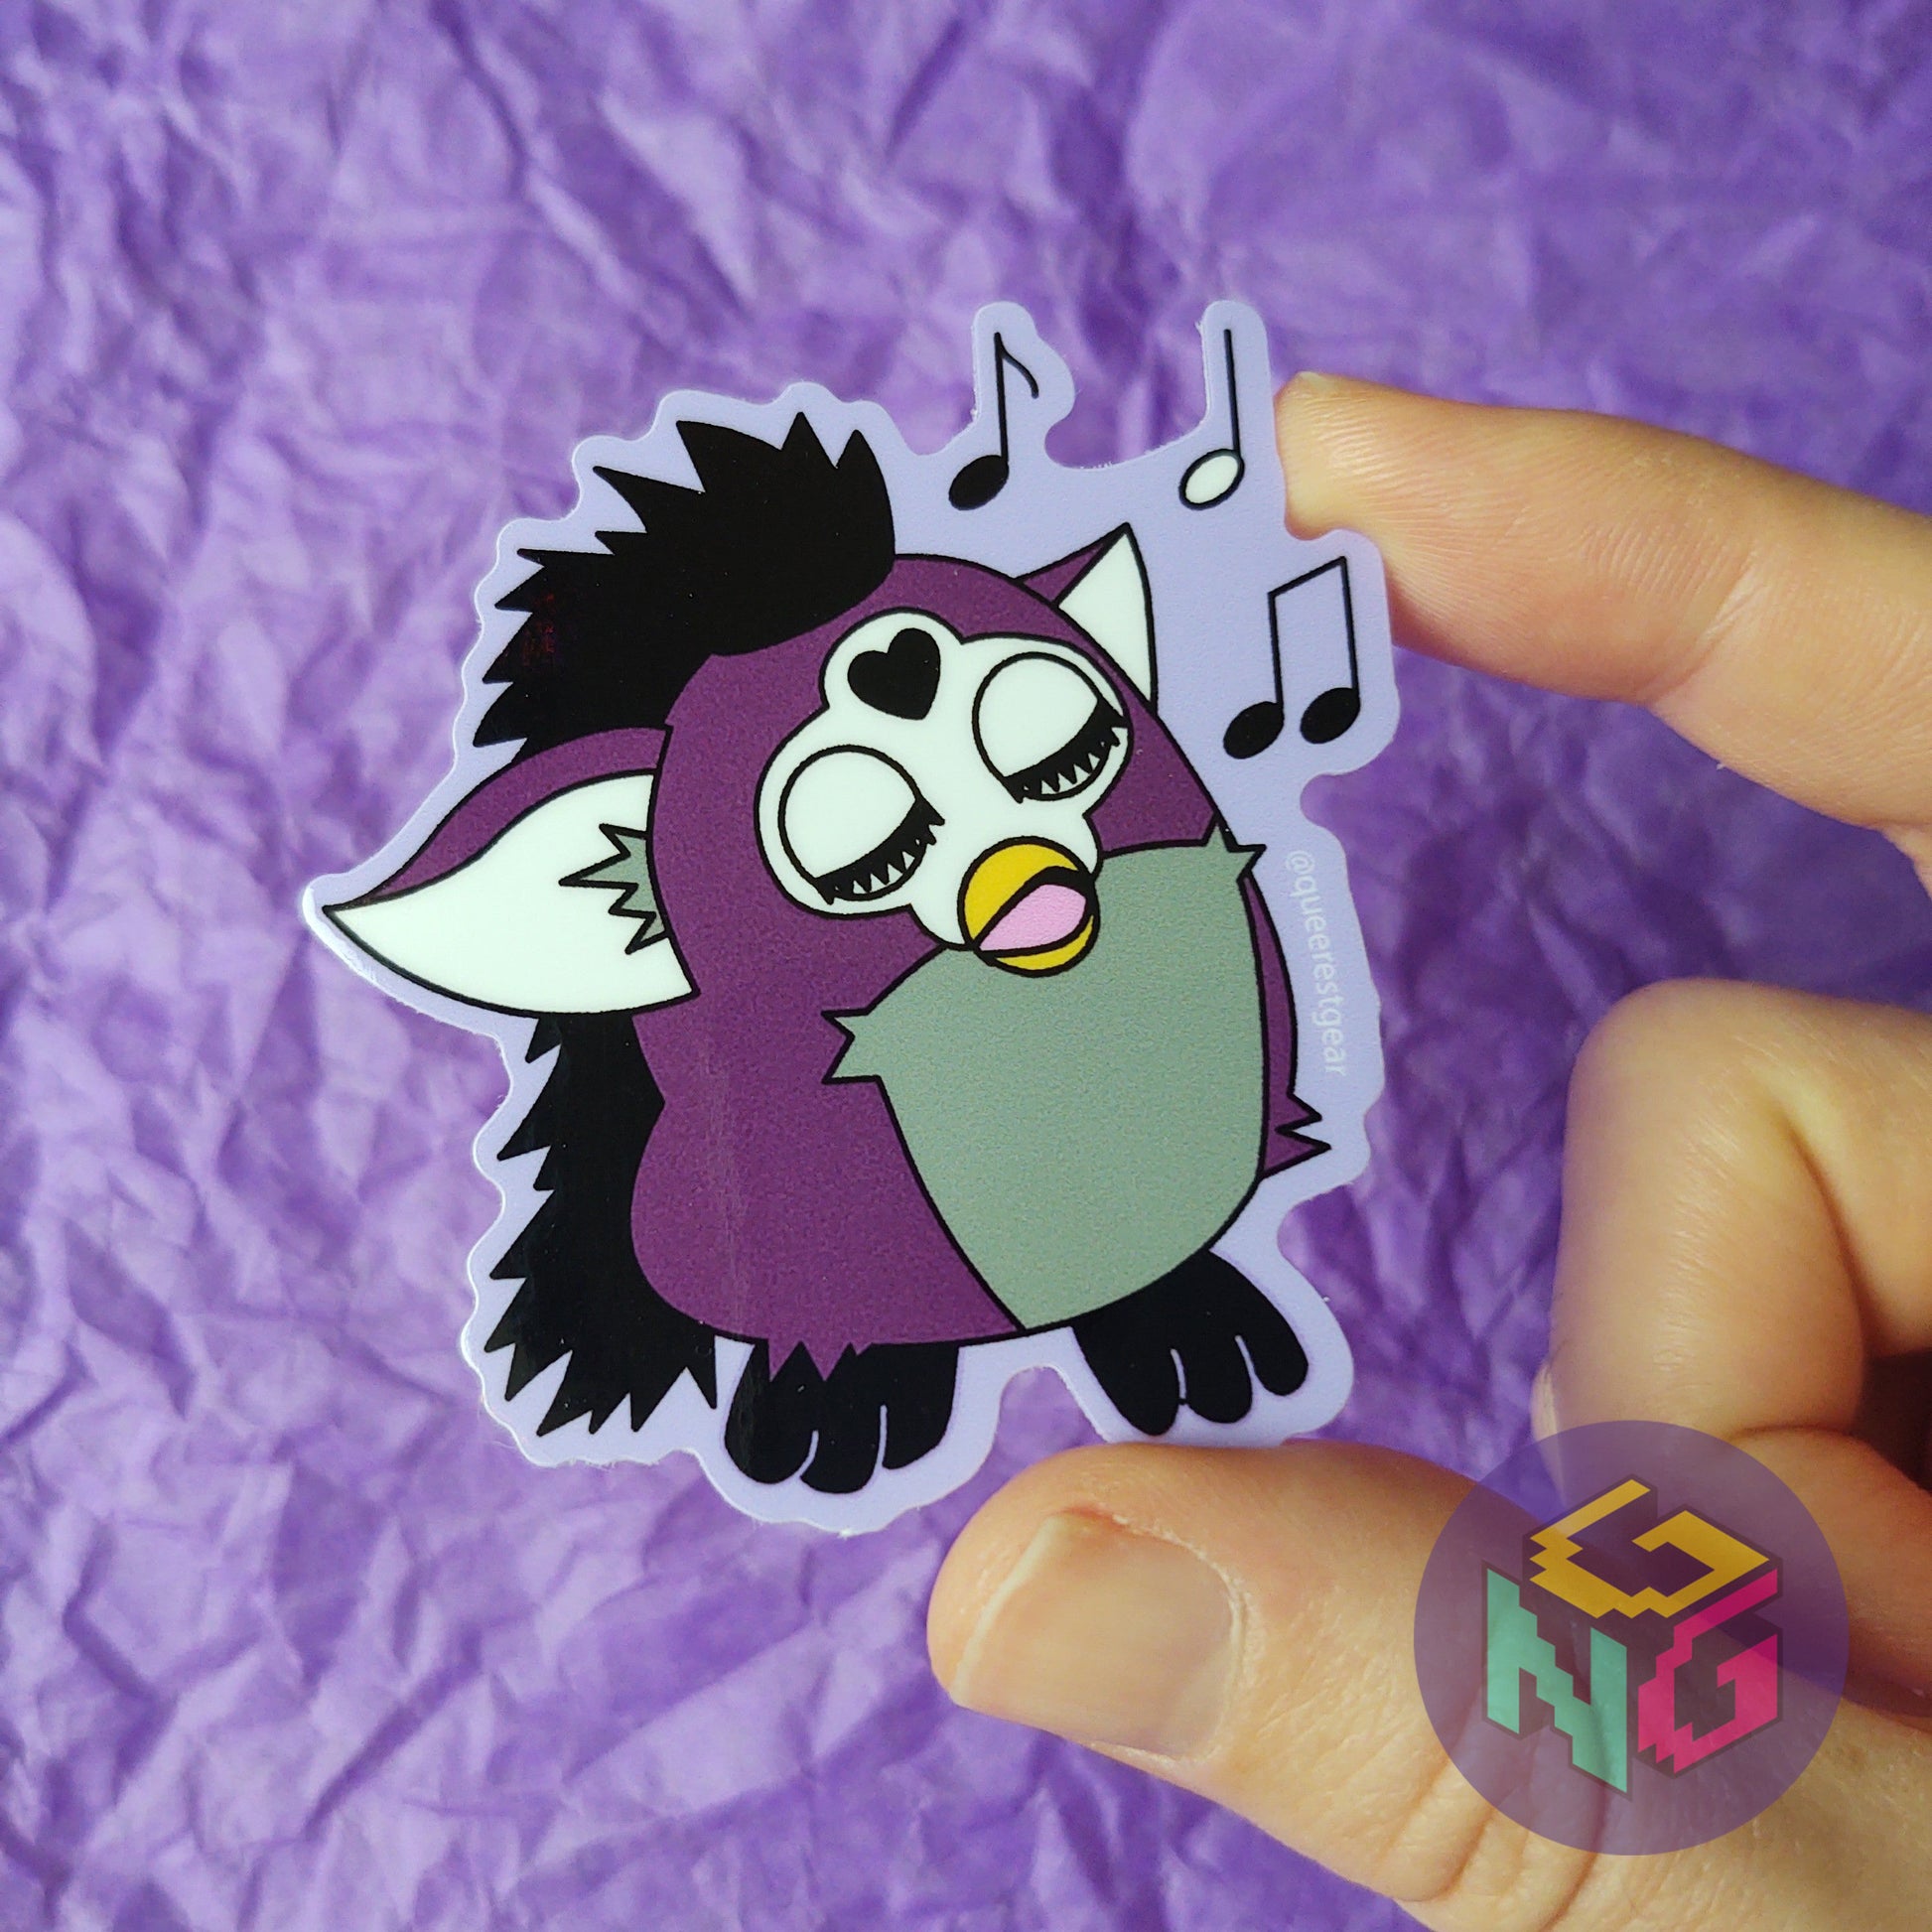 asexual singing furby sticker held in a hand in front of a purple background